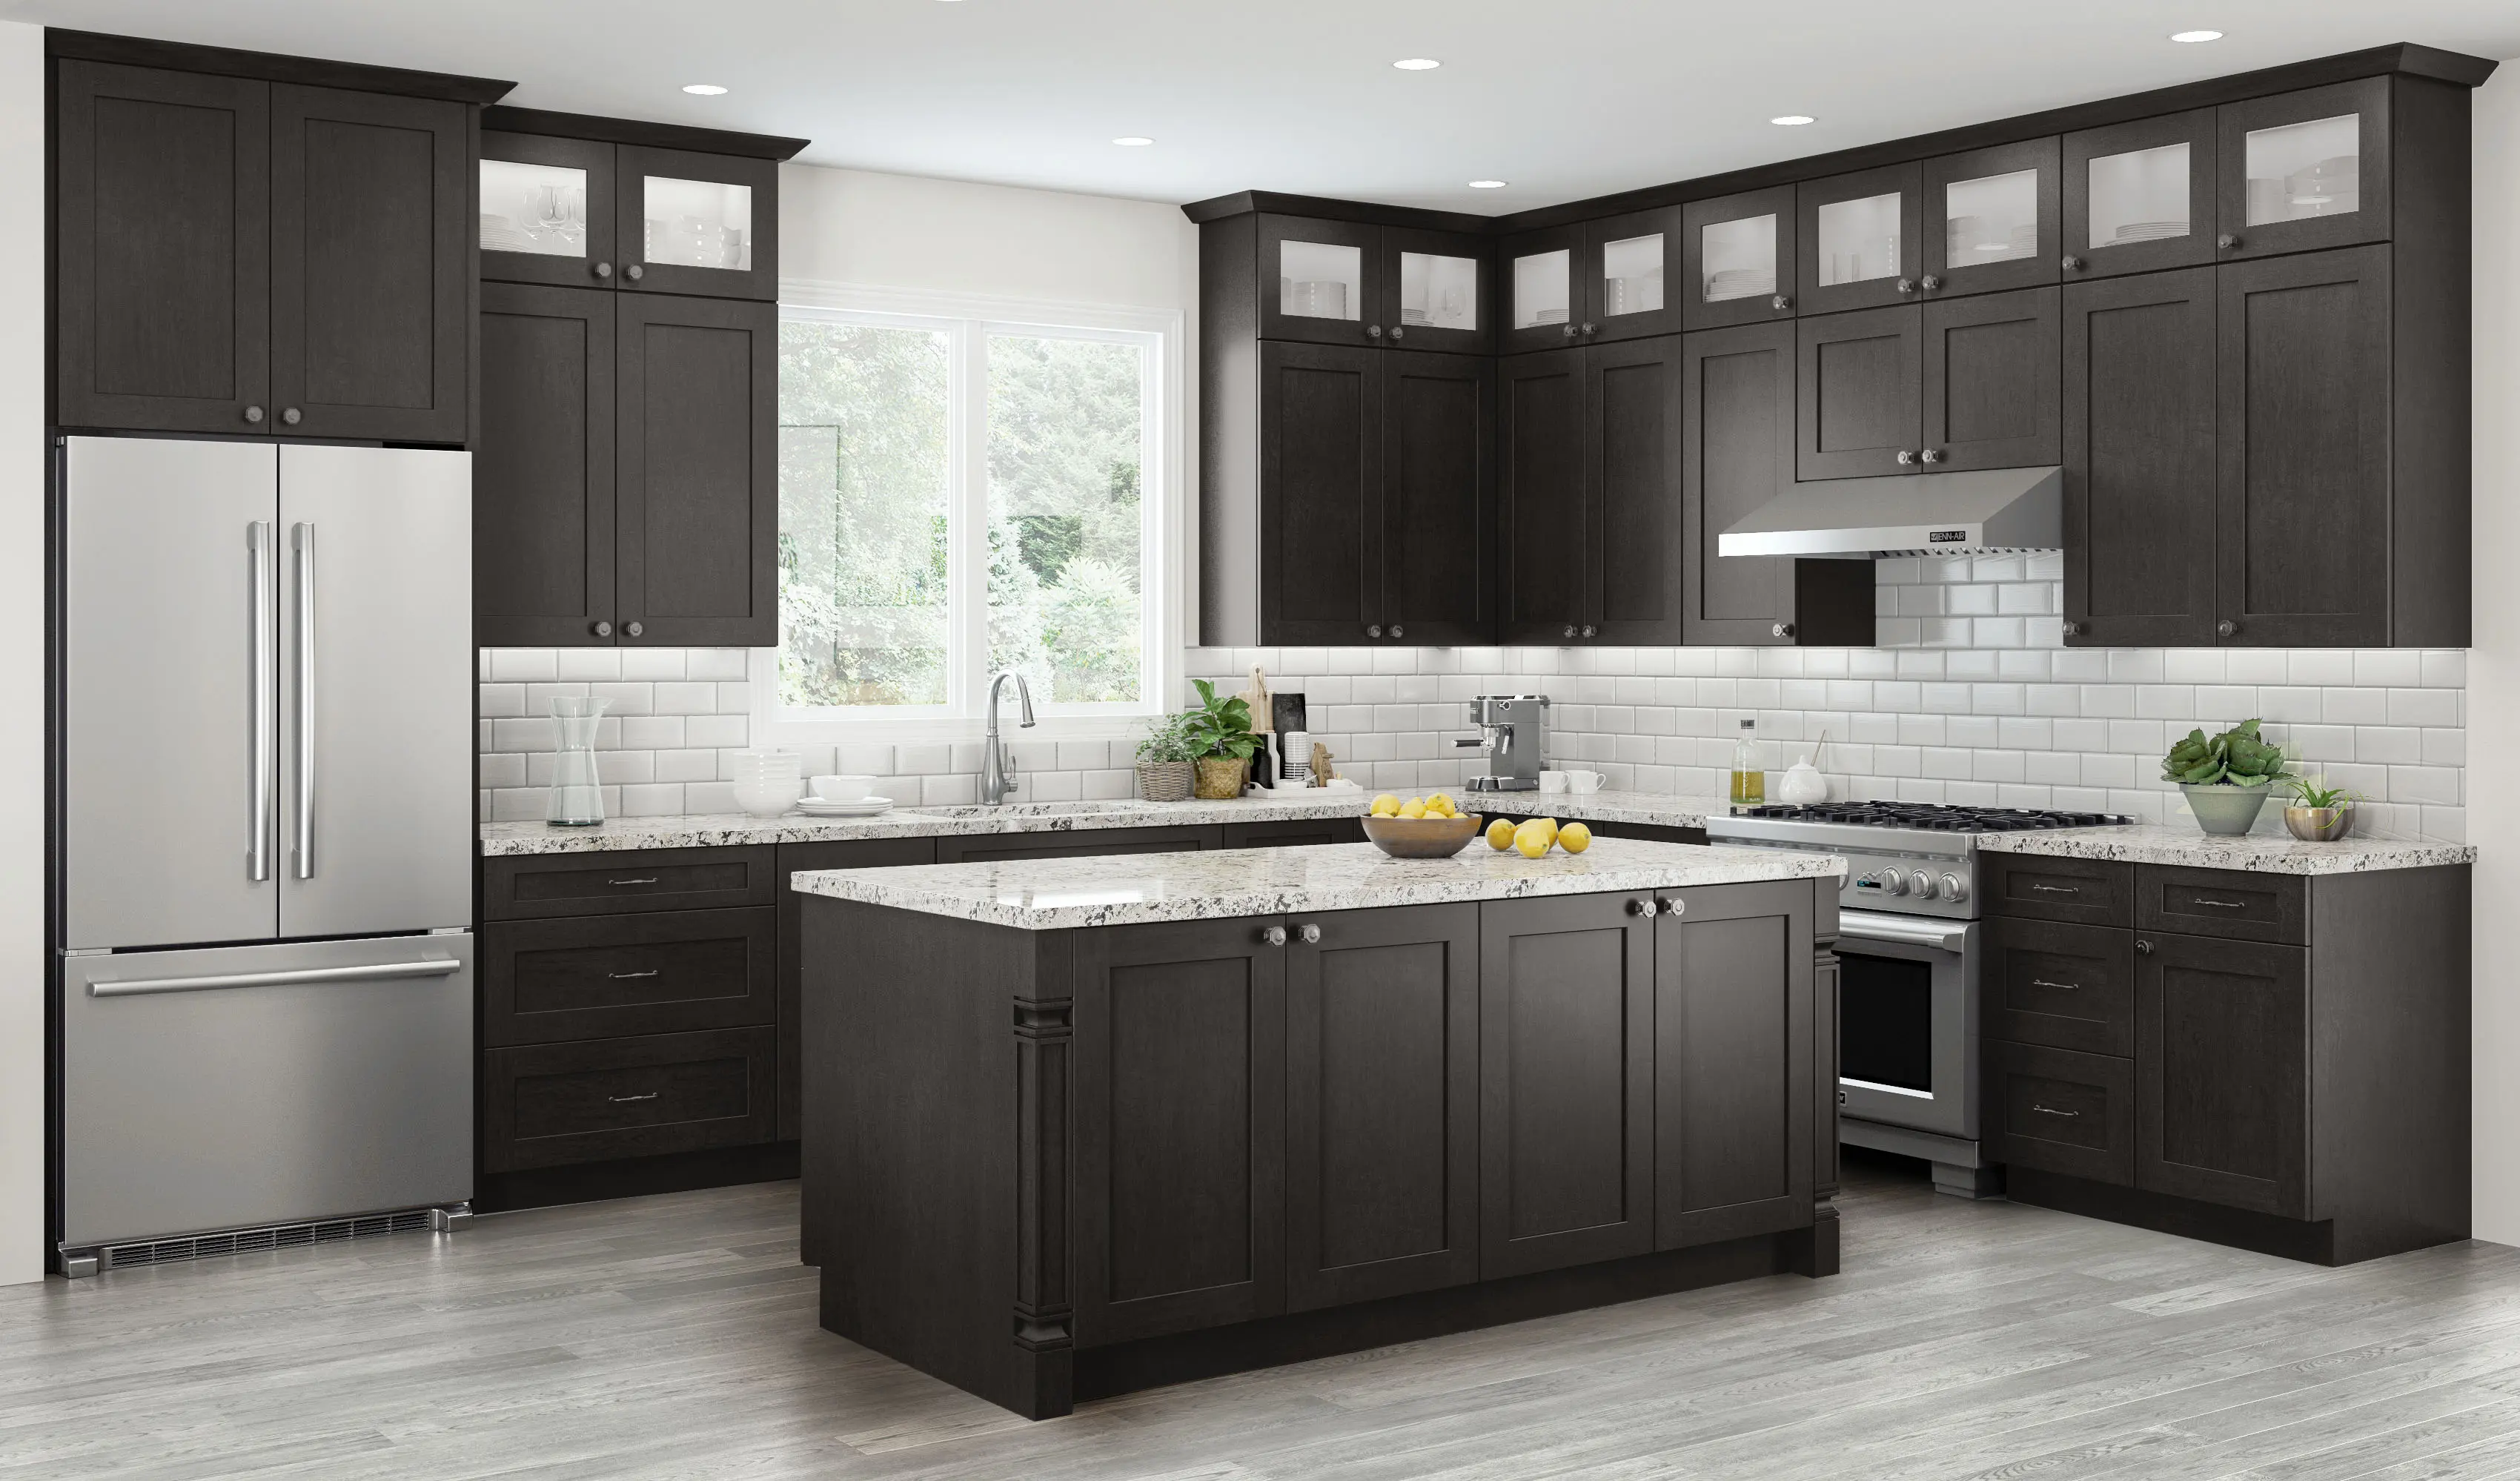 How to Plan for Storage in Your New kitchen Remodel in Baltimore